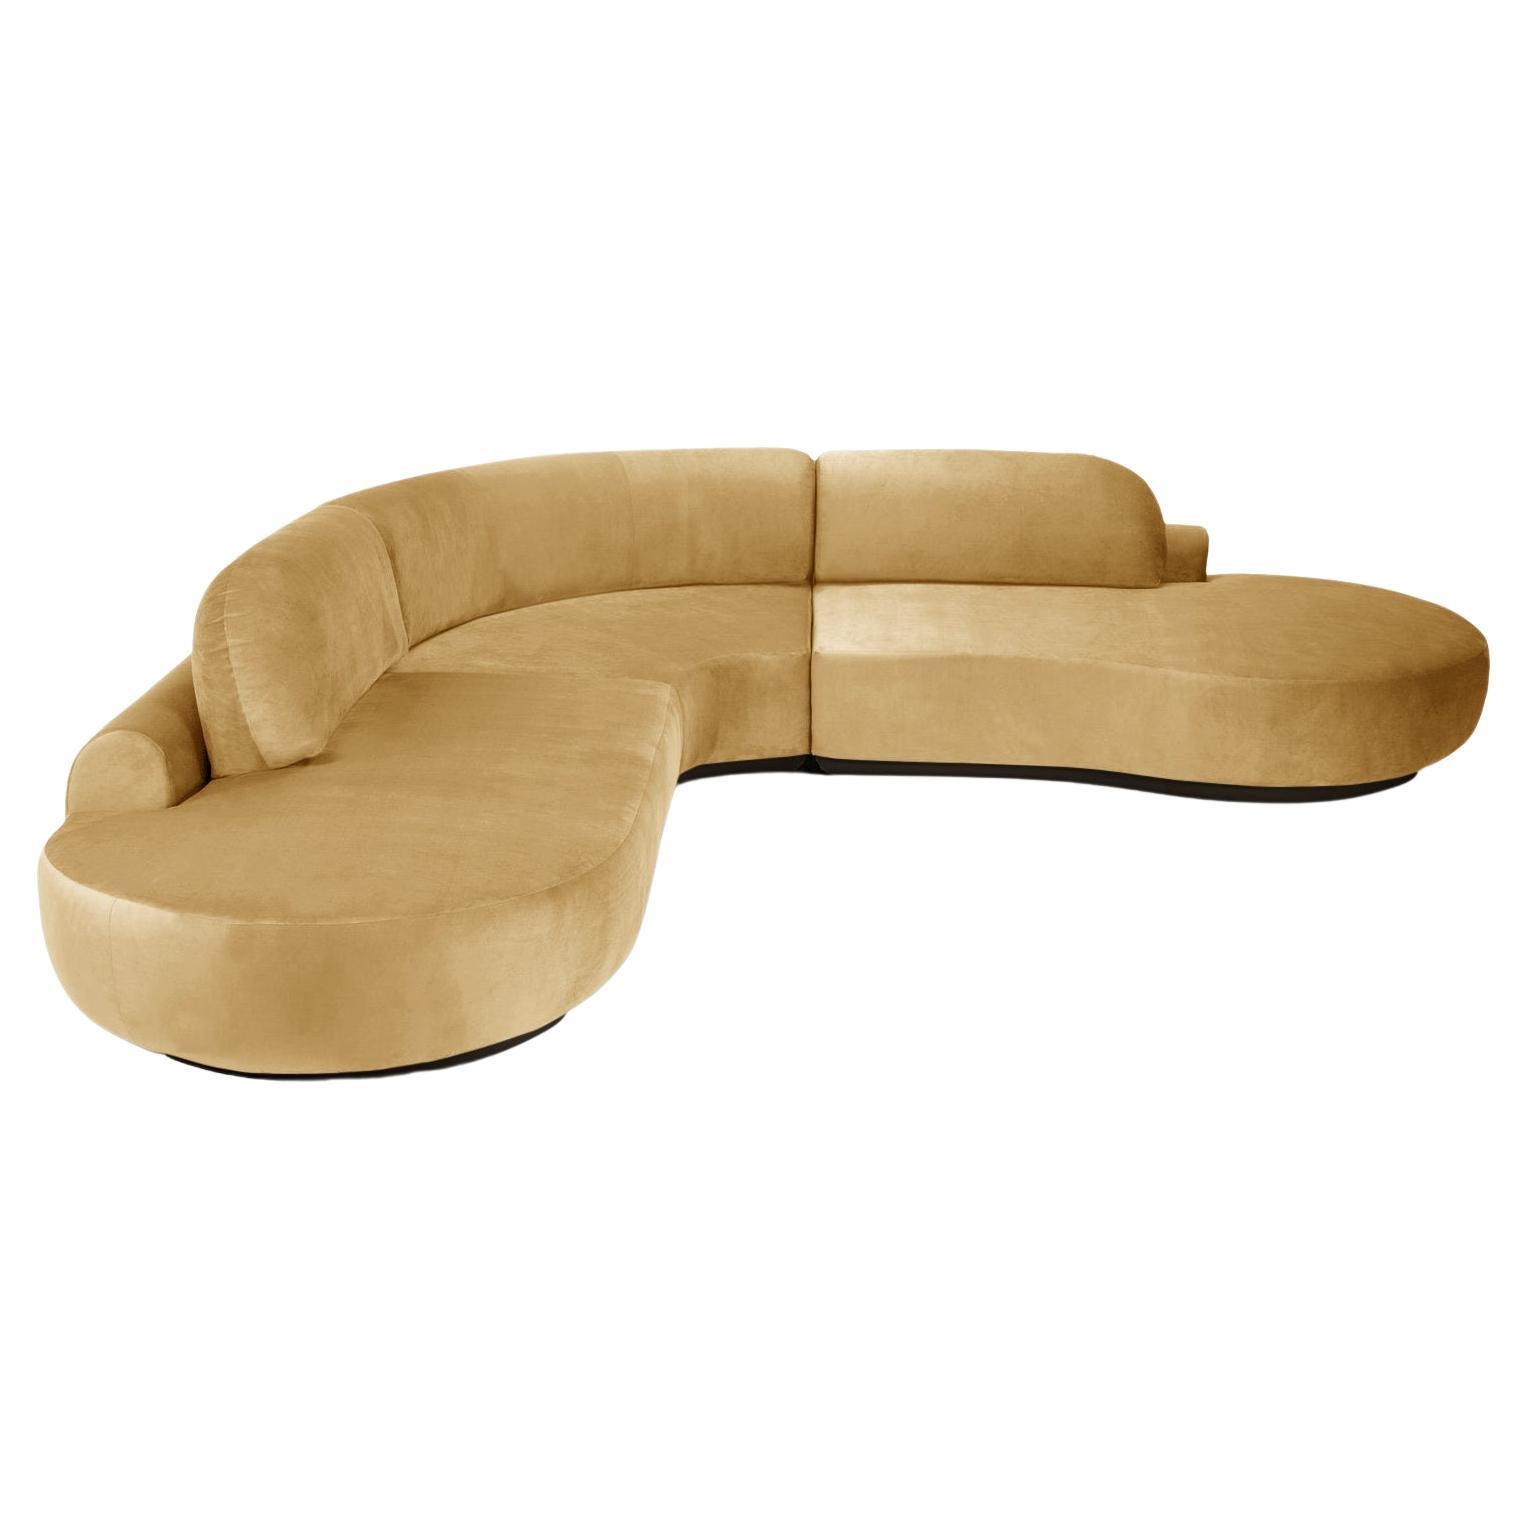 Naked Curved Sectional Sofa, 3 Piece with Beech Ash-056-5 and Vigo Plantain For Sale